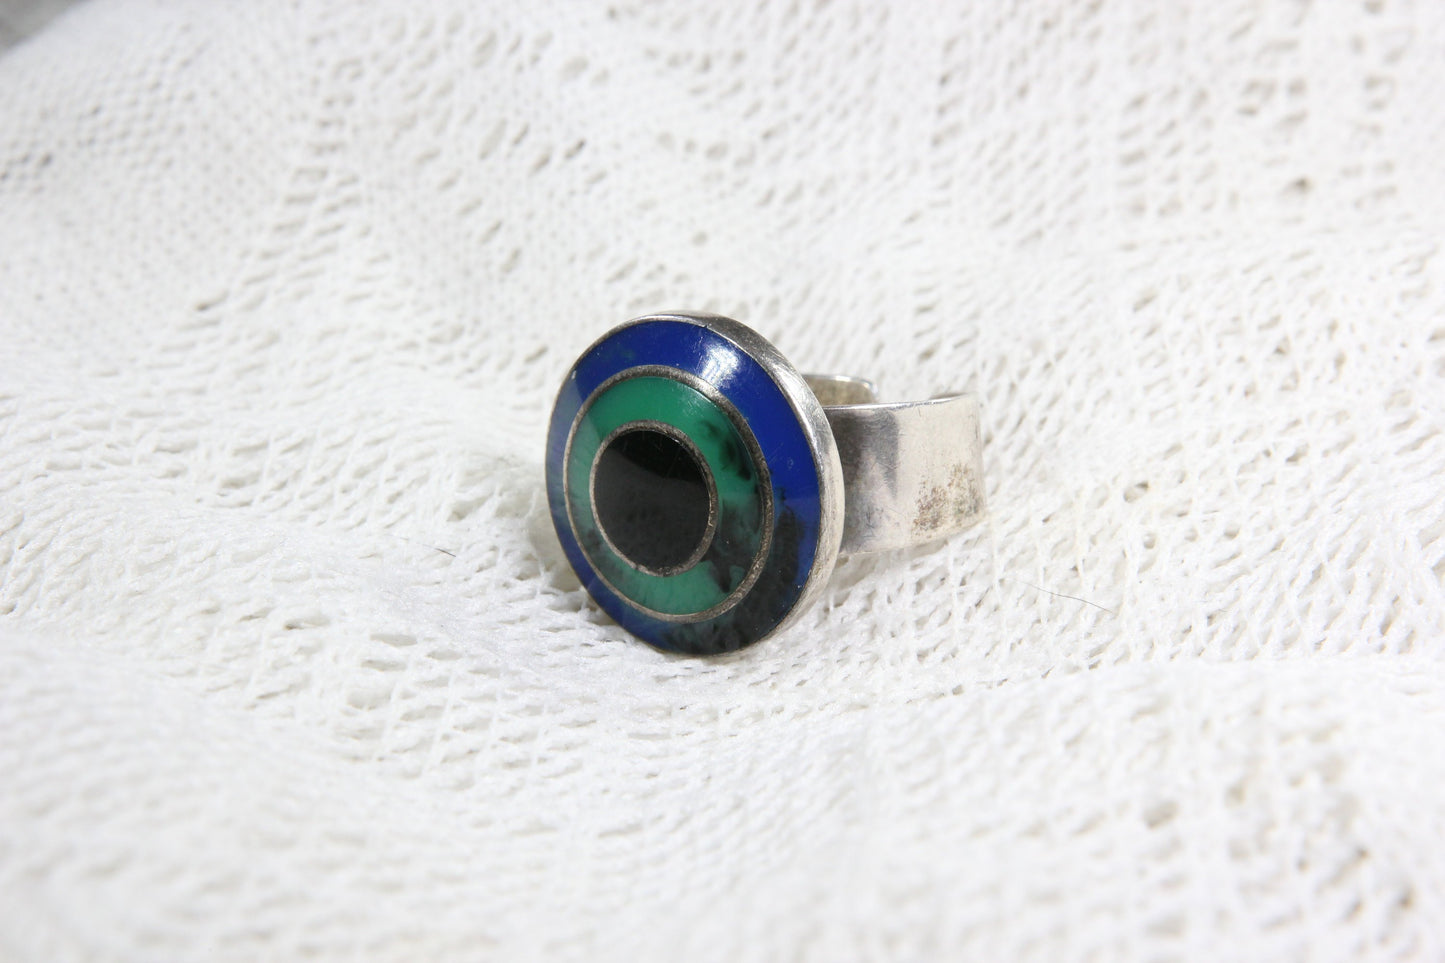 Israel Sterling Silver Ring with Blue Green and Black Target Design, Size 9.5